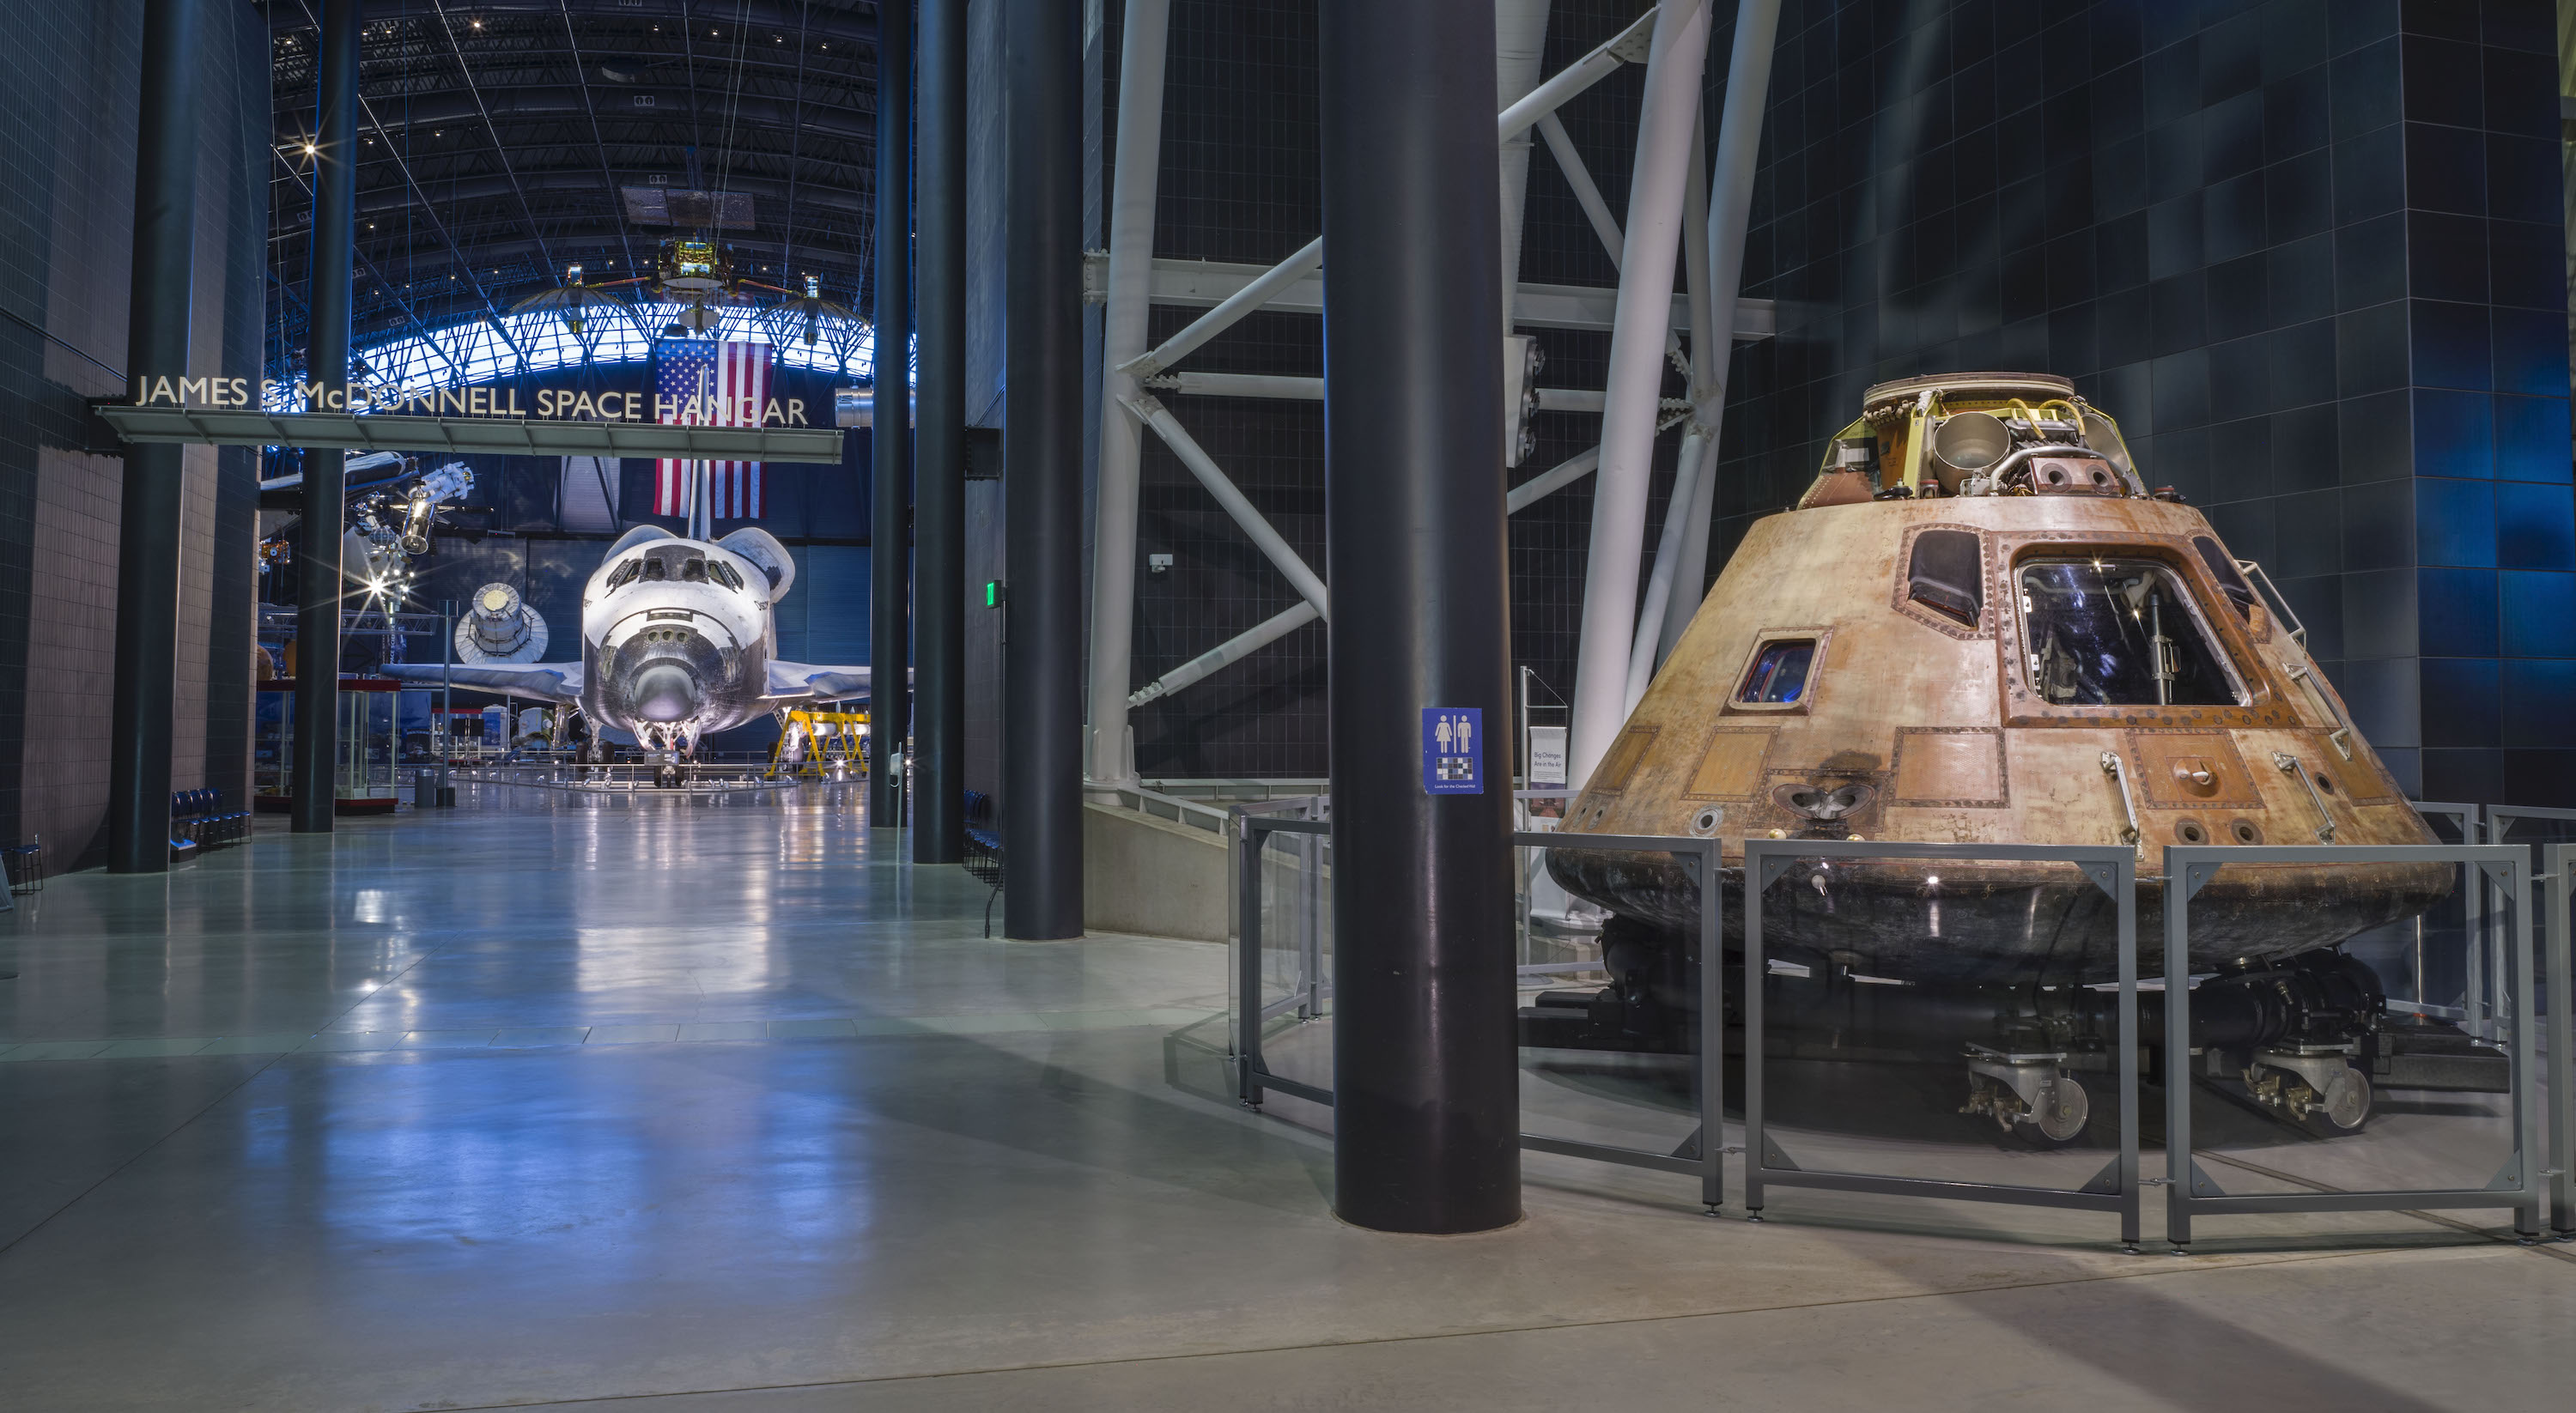 Columbia on display with Discovery in the background